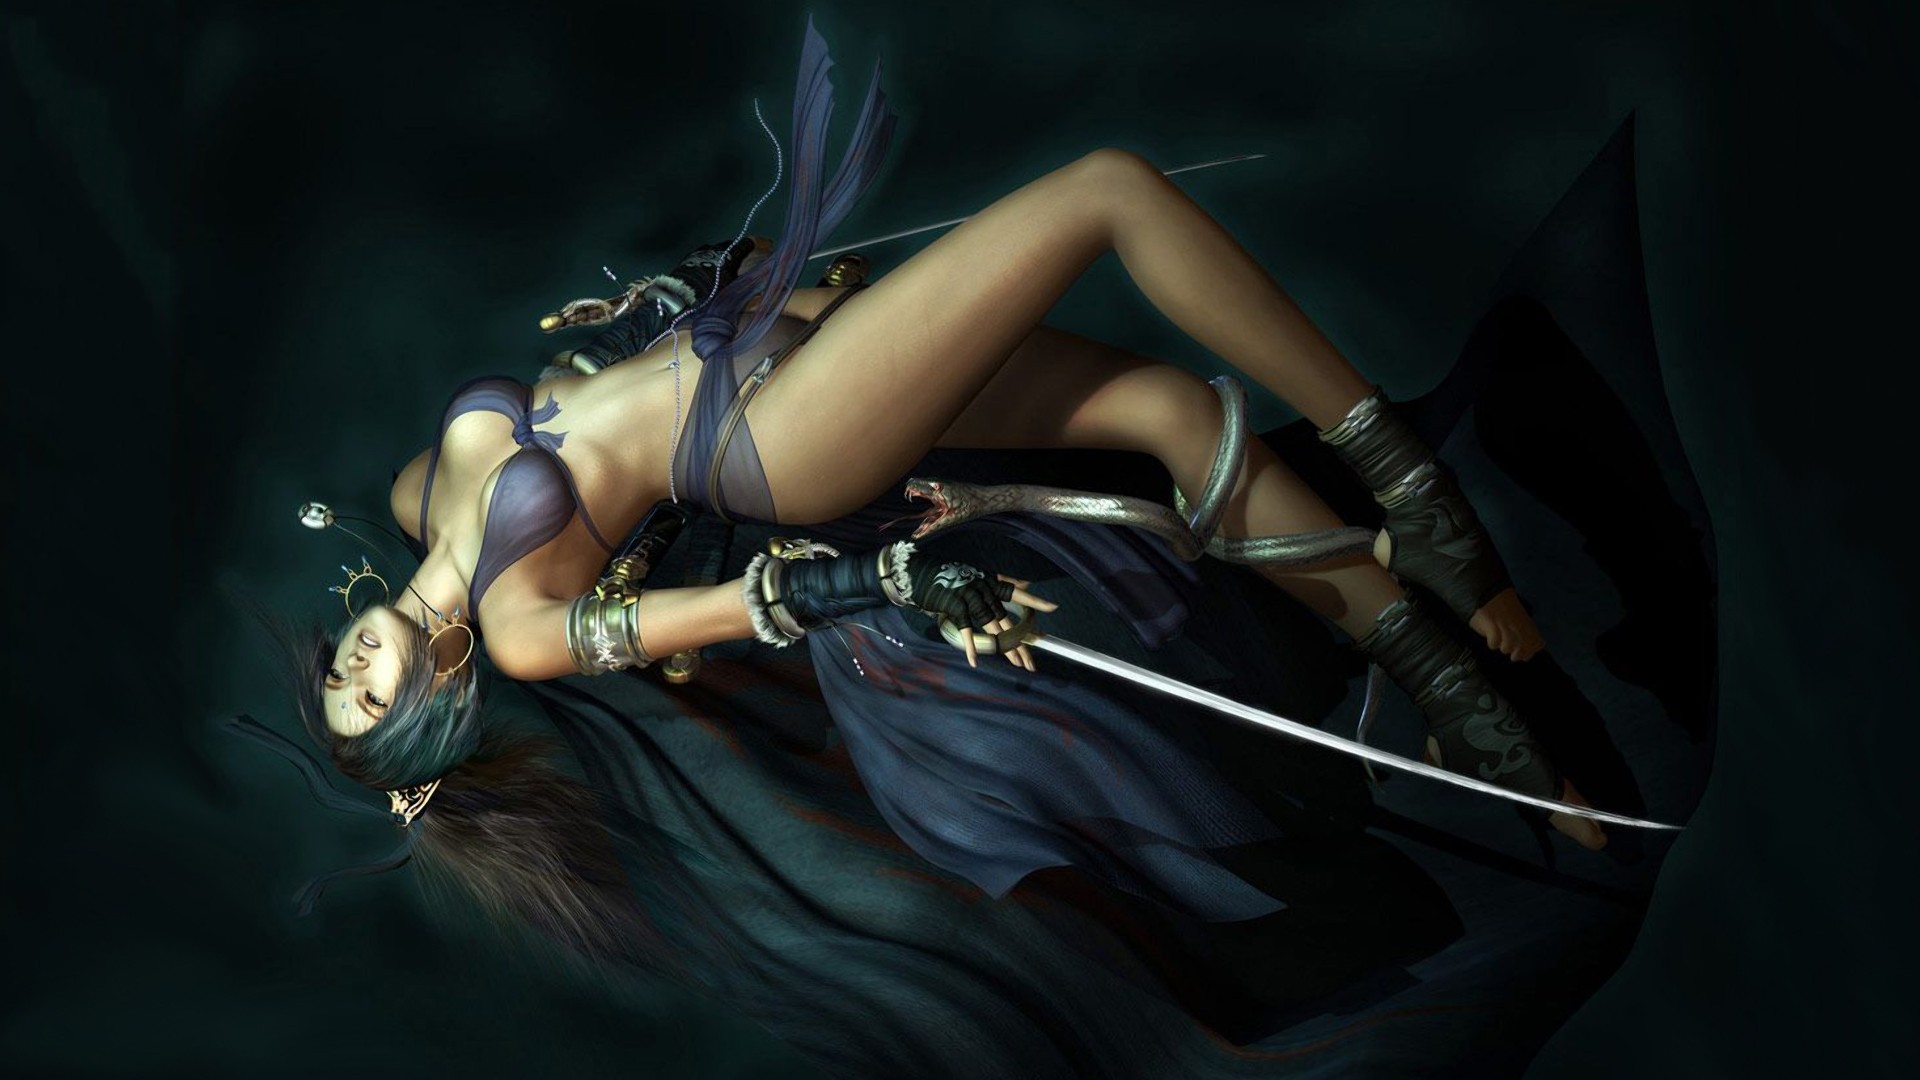 General 1920x1080 Tantra Online fantasy girl fantasy art PC gaming sword boobs belly legs weapon women with swords video game girls